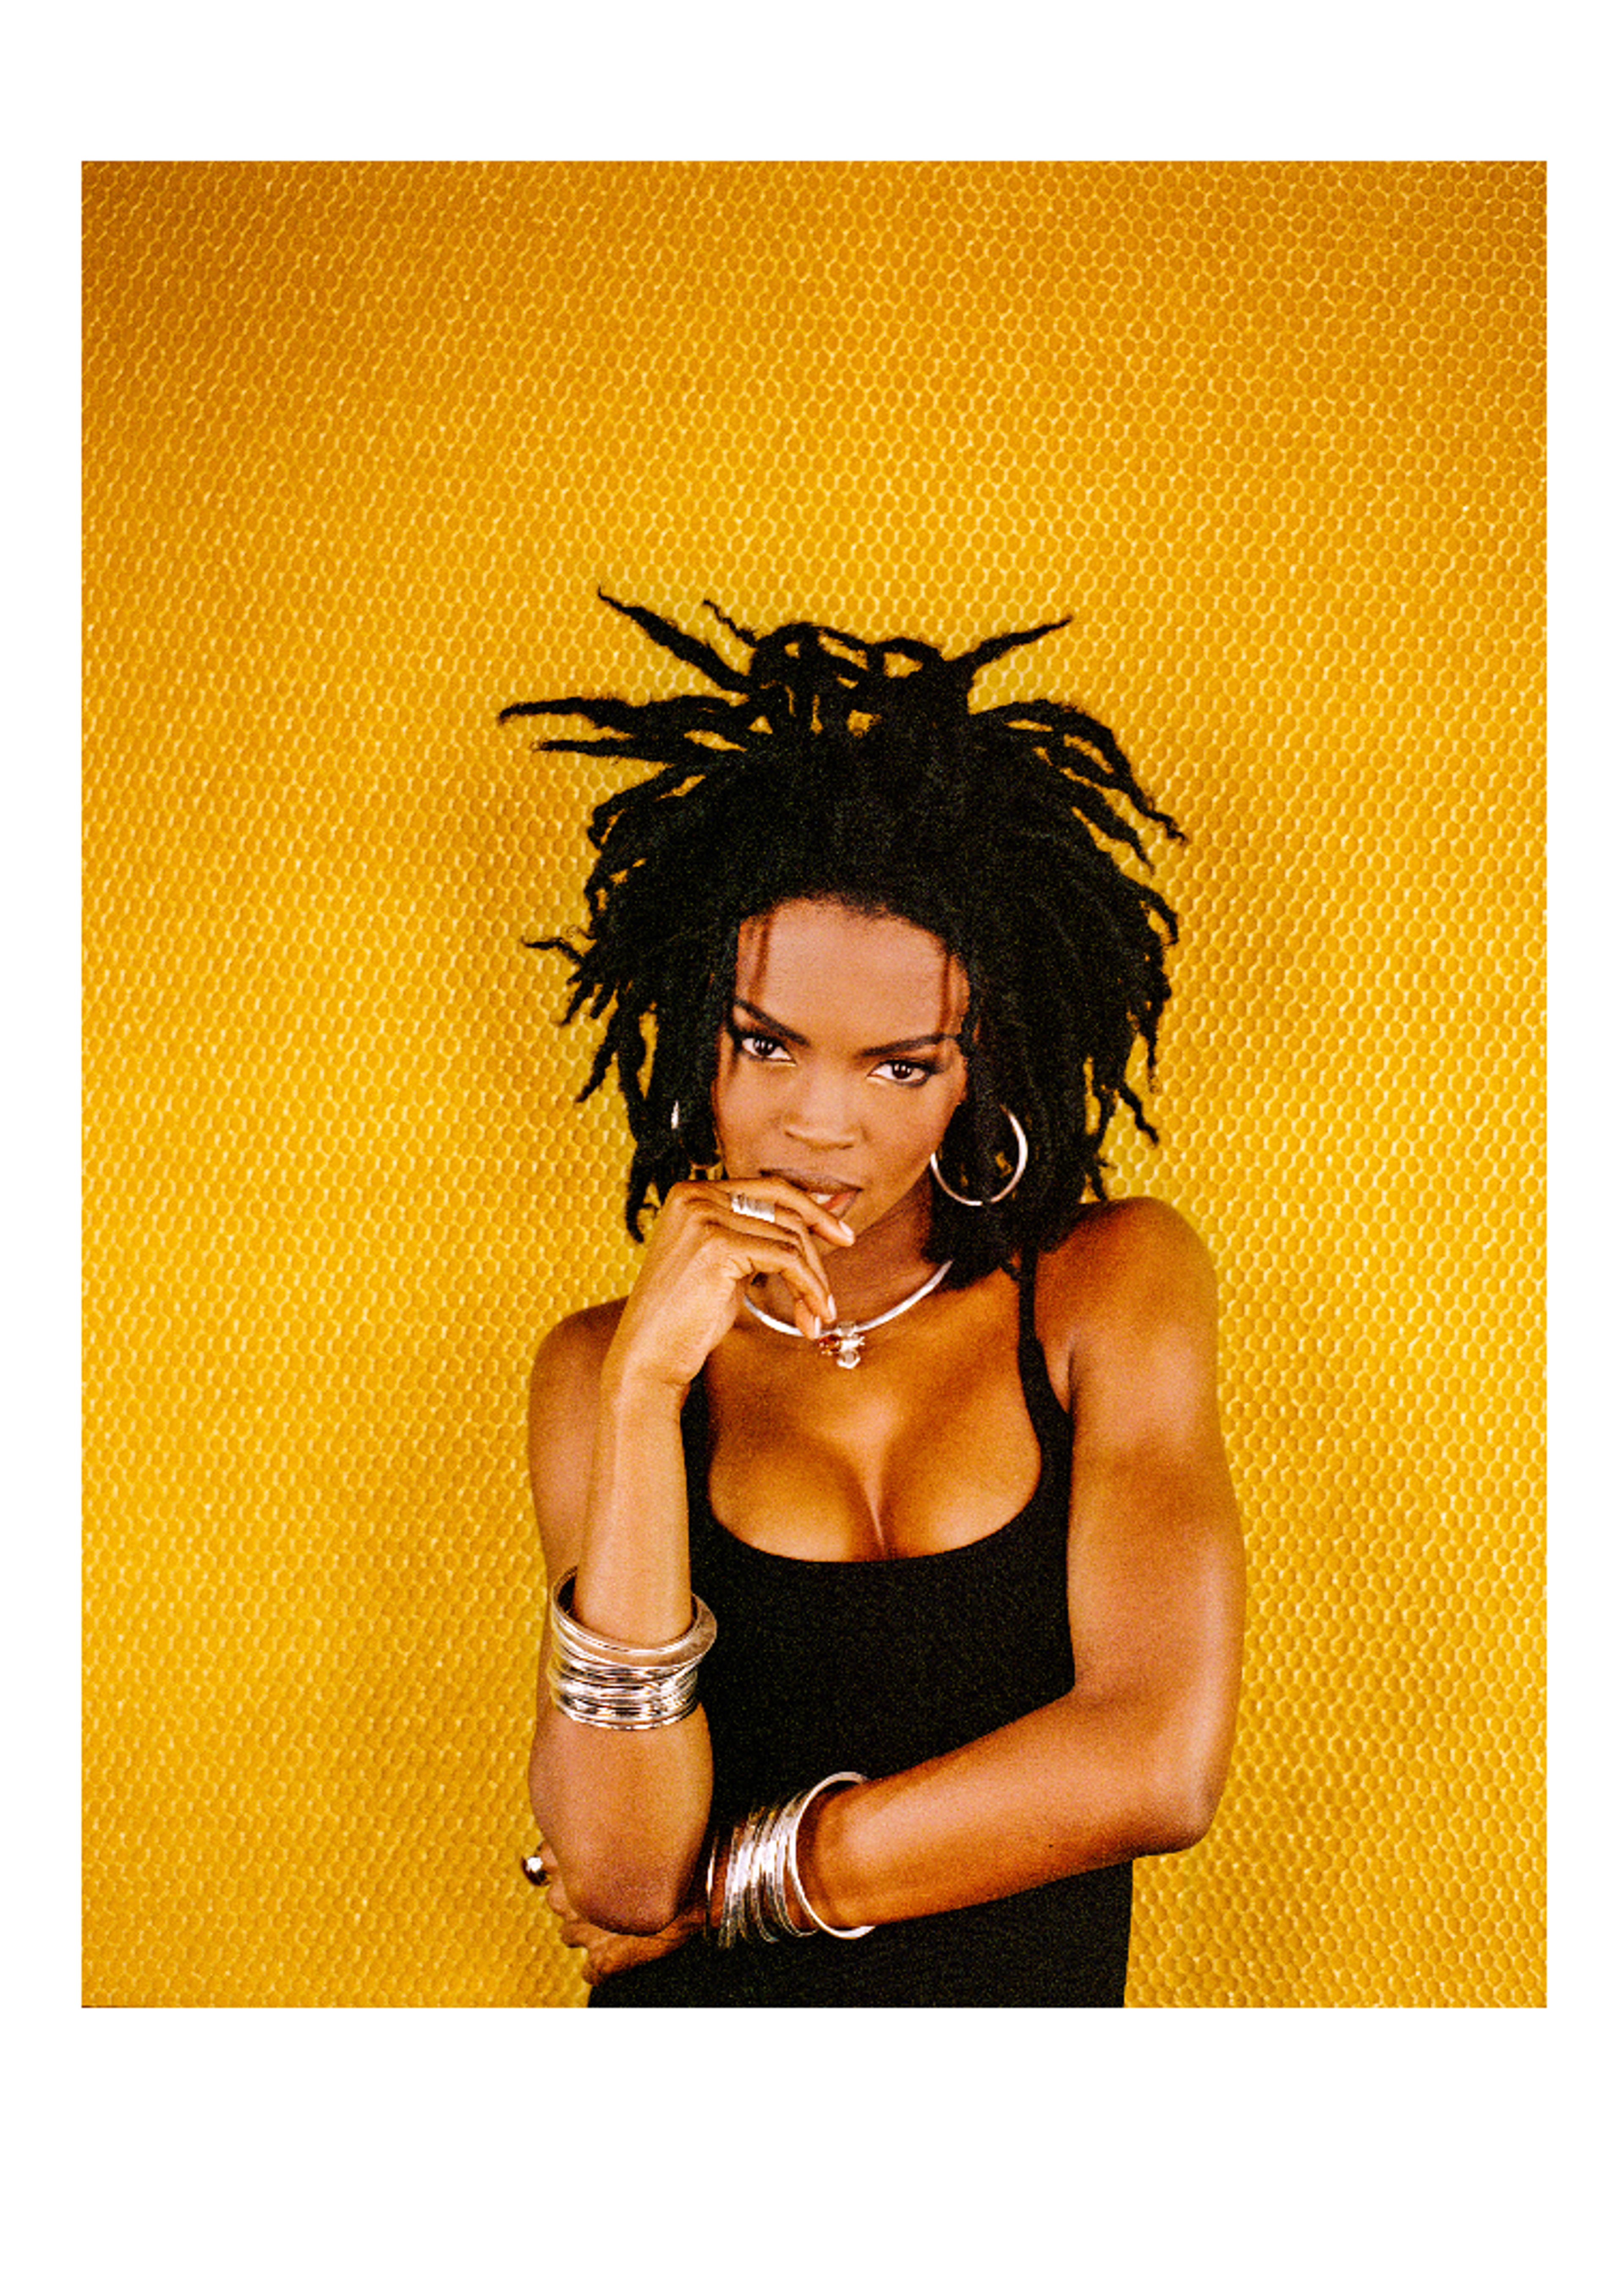 Alternate View 1 of Ms. Lauryn Hill Print